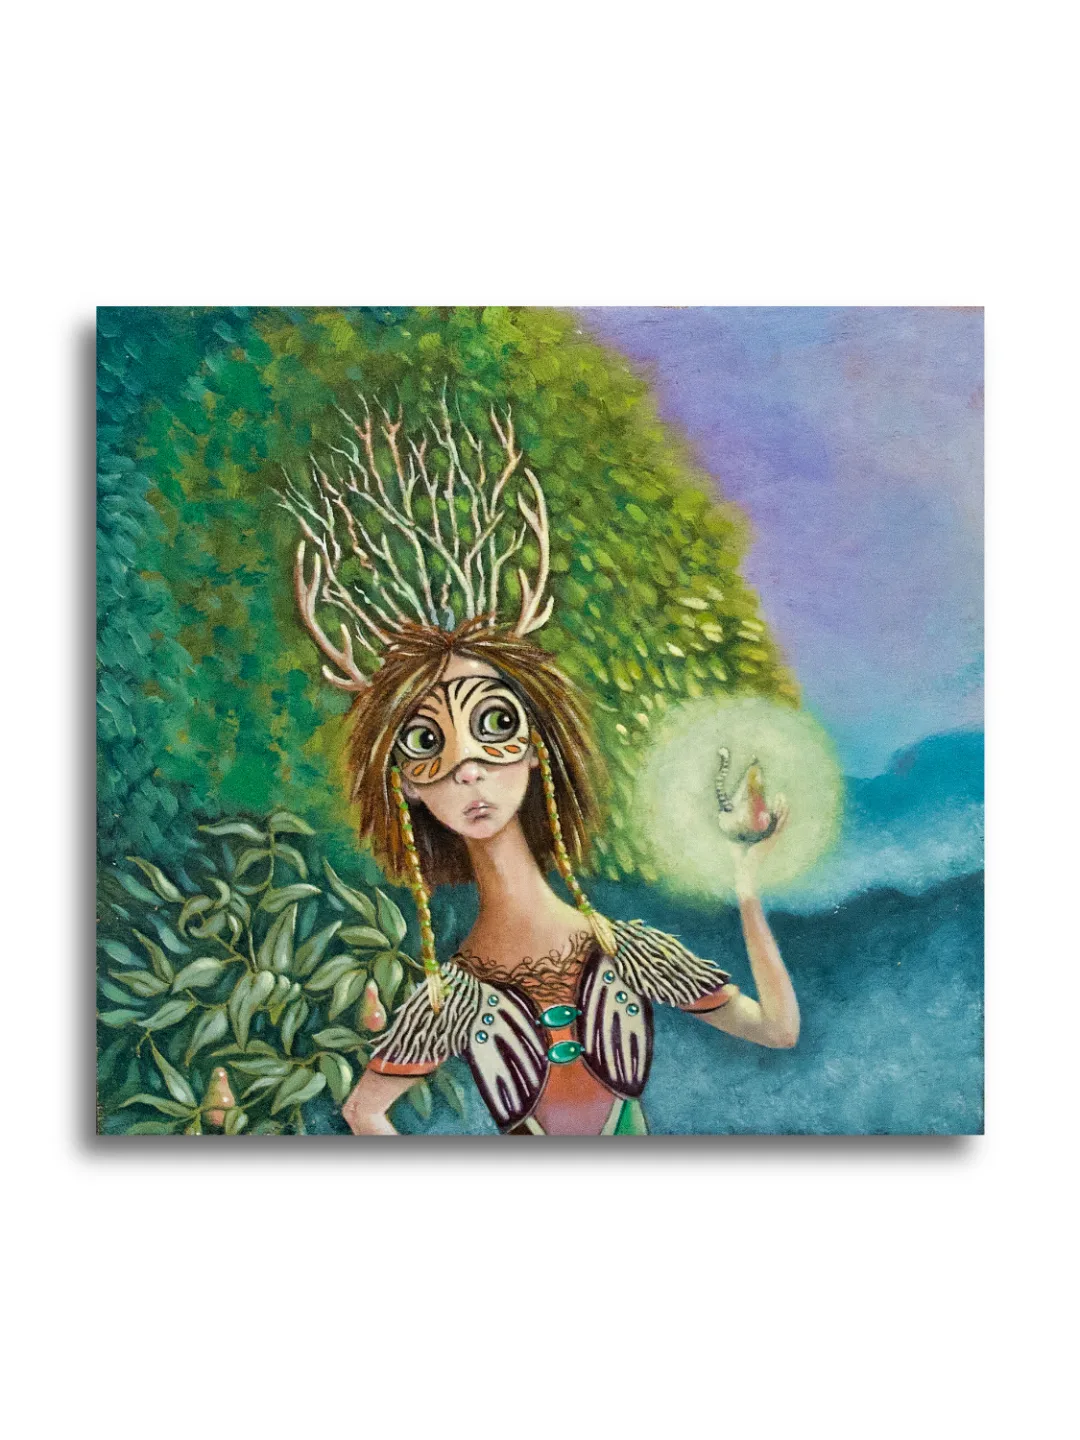 Dryad by Ann Richmond - A stunning, Original artwork featuring a Dryad (Wood Nymph) and a wormy-apple! Painted in the artist's unique style... Framing available.